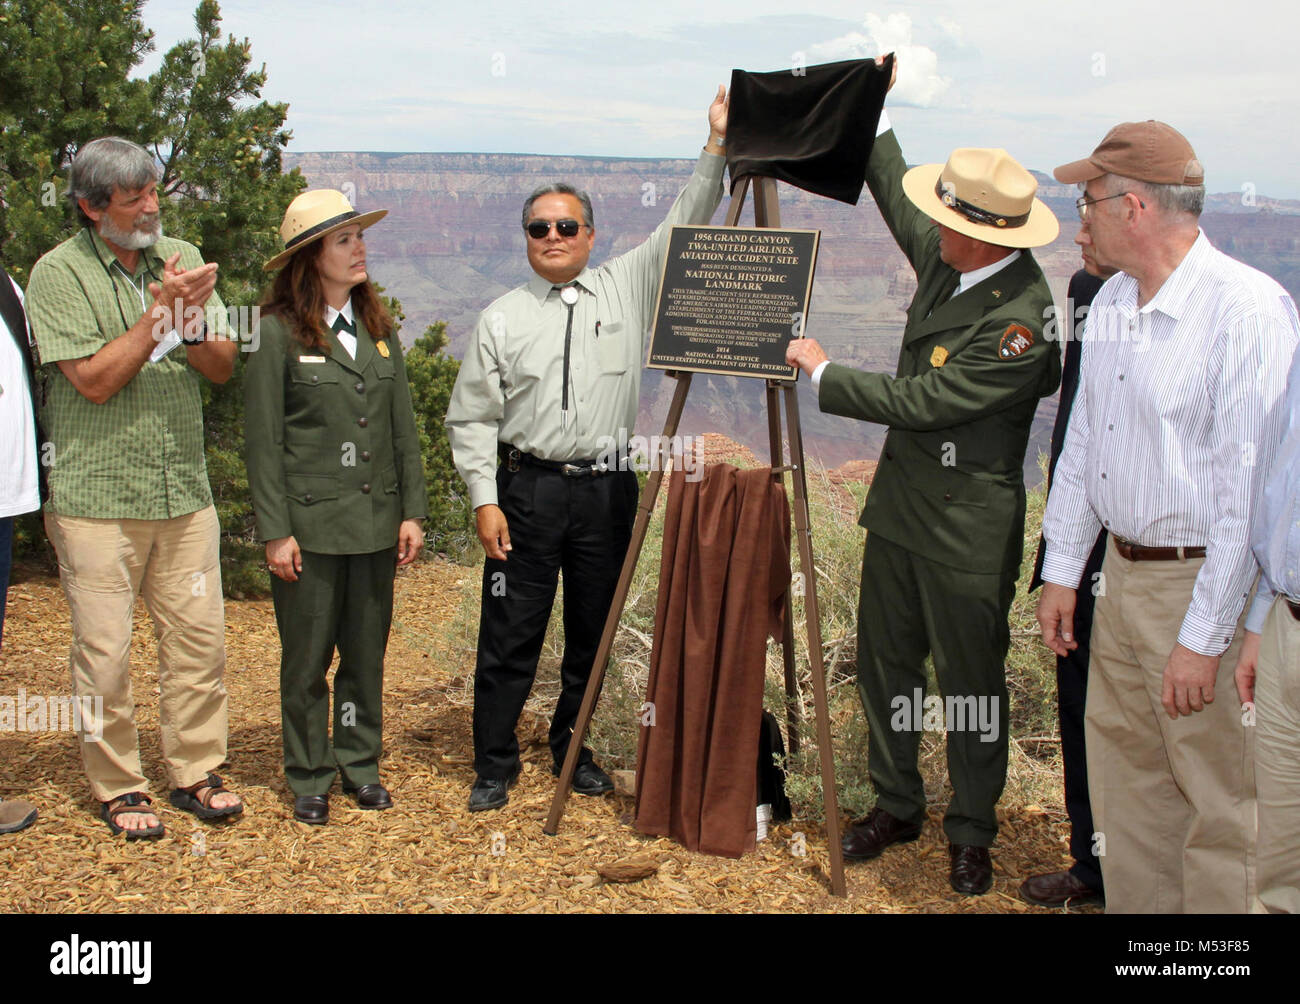 1956 Grand Canyon TWA-United Airlines Aviation Accident Site National Historic. Left to right: Wayne Ranney, Grand Canyon Historical Society; Laura Joss, Deputy Regional Director, Intermountain Region;  David V. Uberuaga, Superintendent Grand Canyon National Park; David V. Uberuaga, Superintendent Grand Canyon National Park;Mike Nelson, Nephew of United Airlines Passenger, Author of “We Are Going In.”   On Tuesday, July 8, 2014, the National Park Service (NPS) dedicated one of the nation’s newest National Historic Landmarks, the 1956 Grand Canyon TWA-United Airlines Aviation Accident Site in G Stock Photo